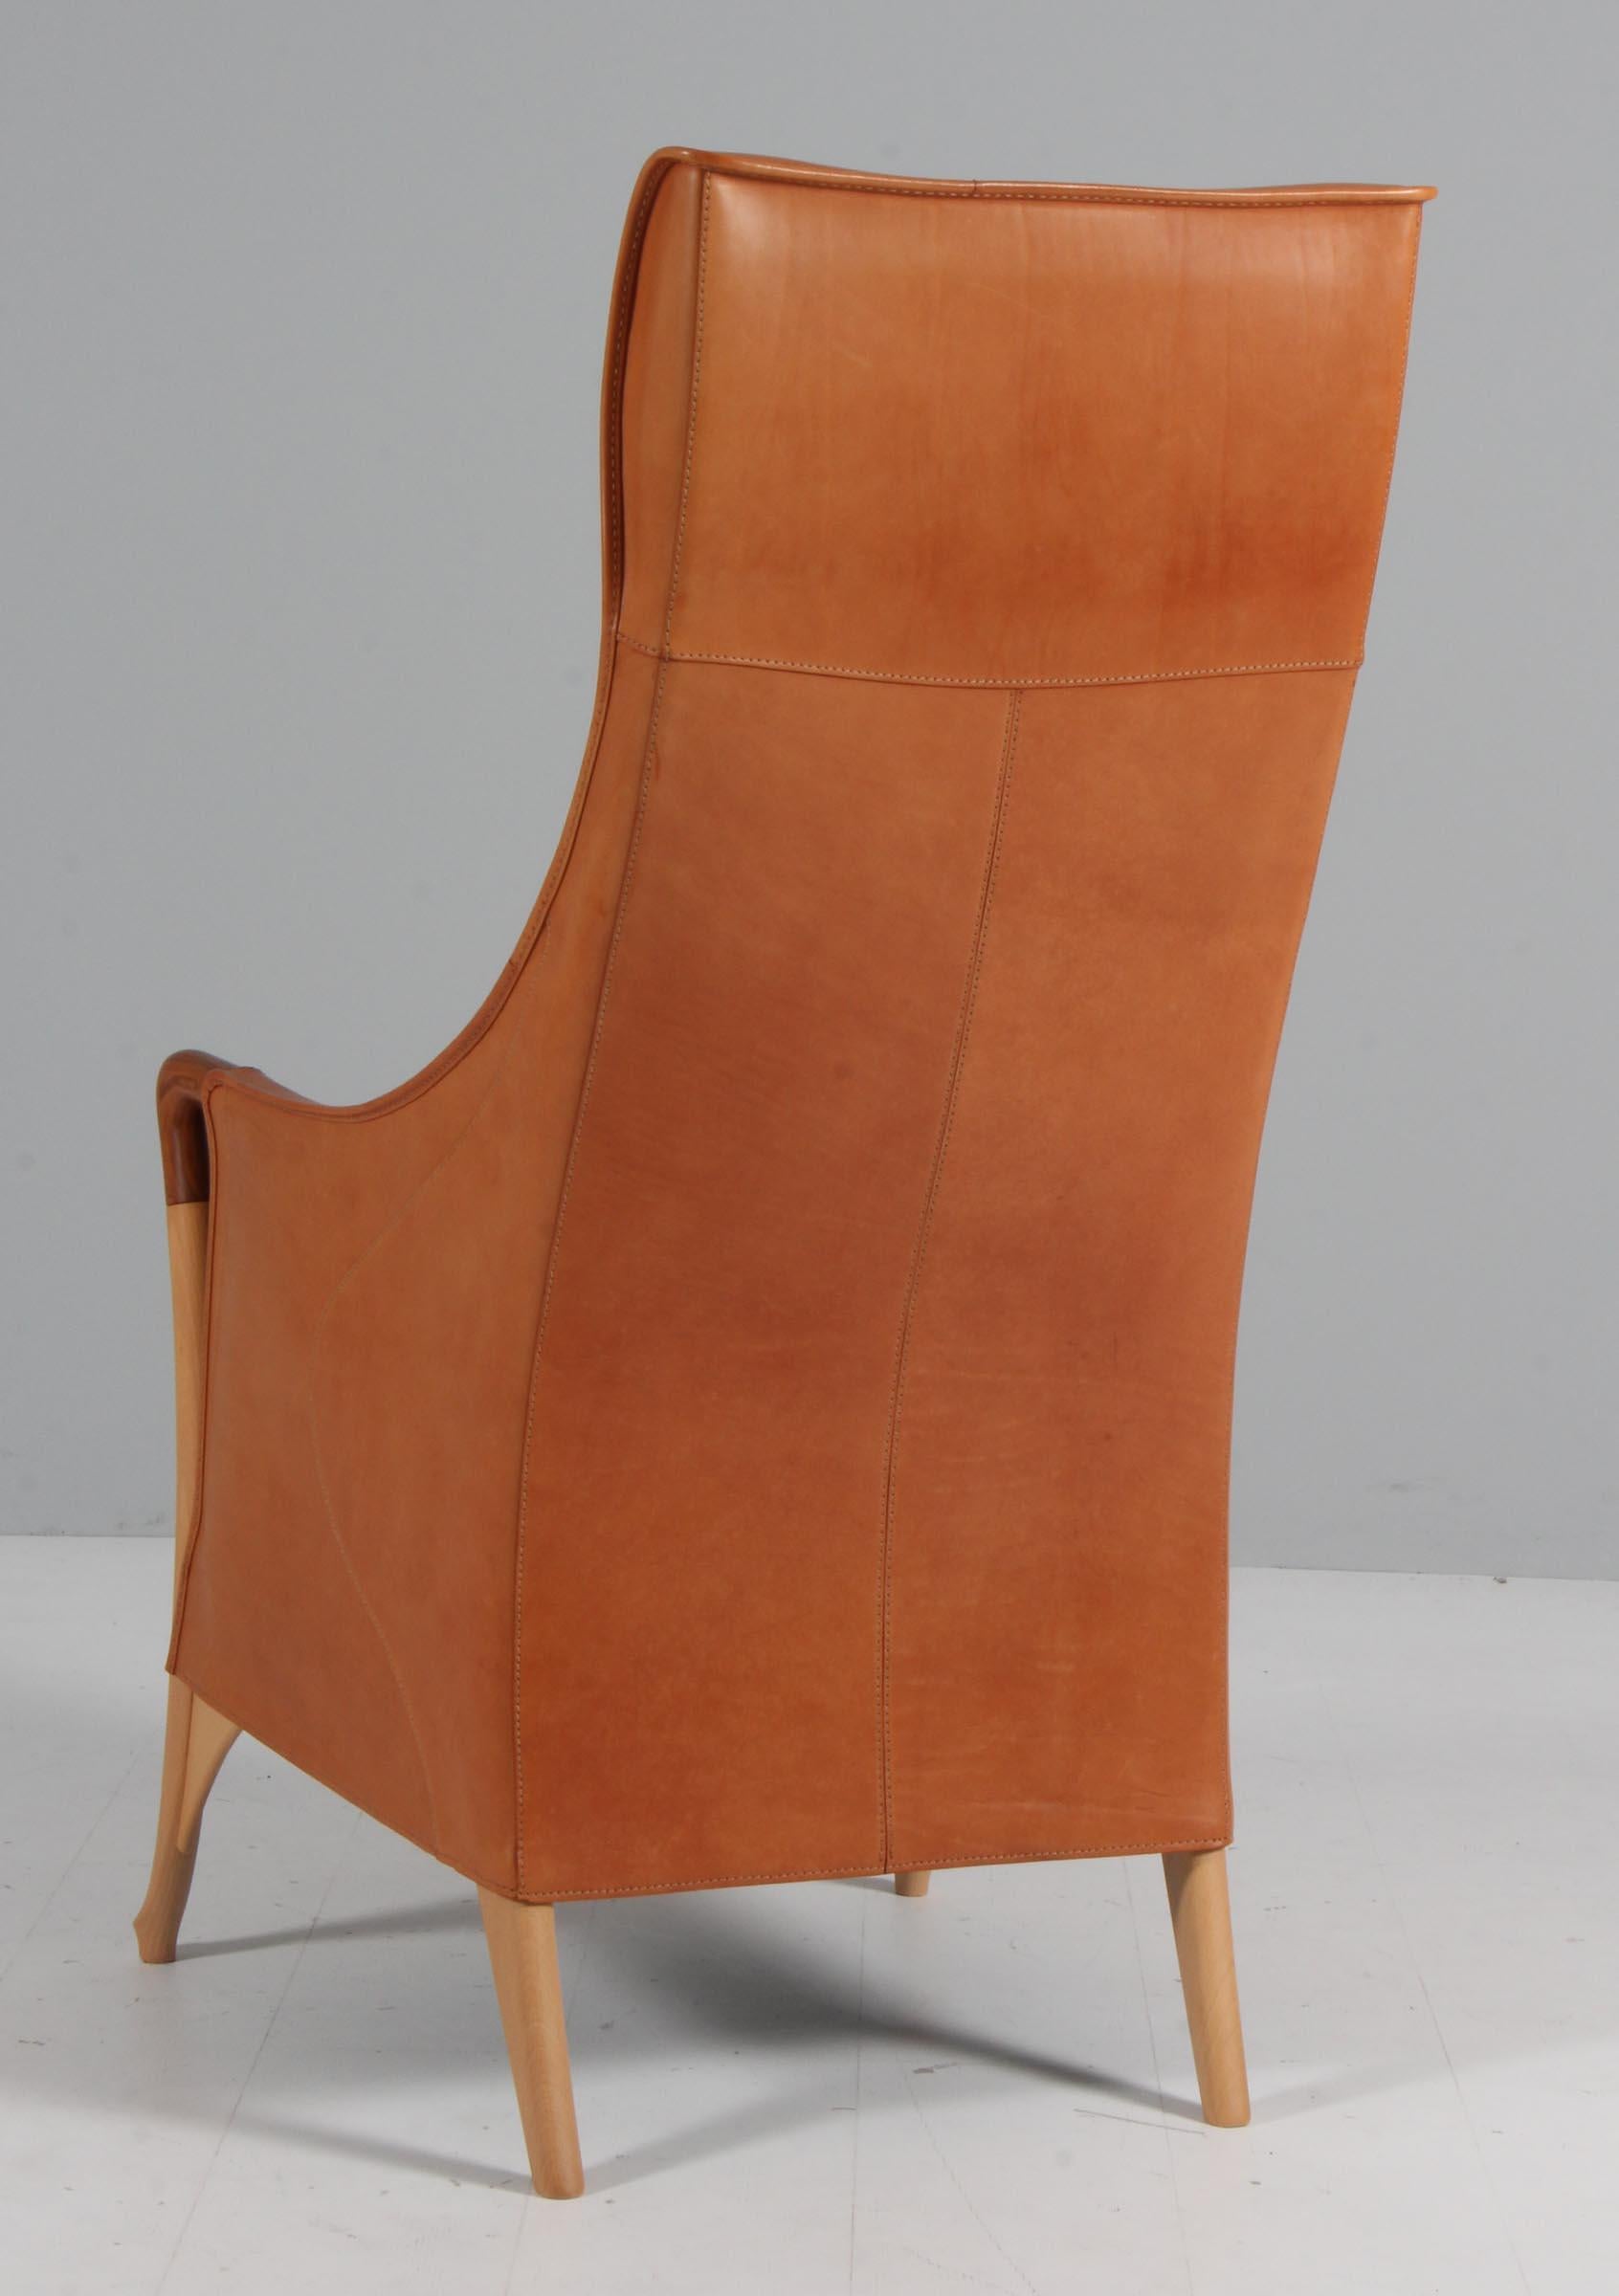 Umberto Asnago for Giorgetti lounge chair in saddle leather For Sale 2